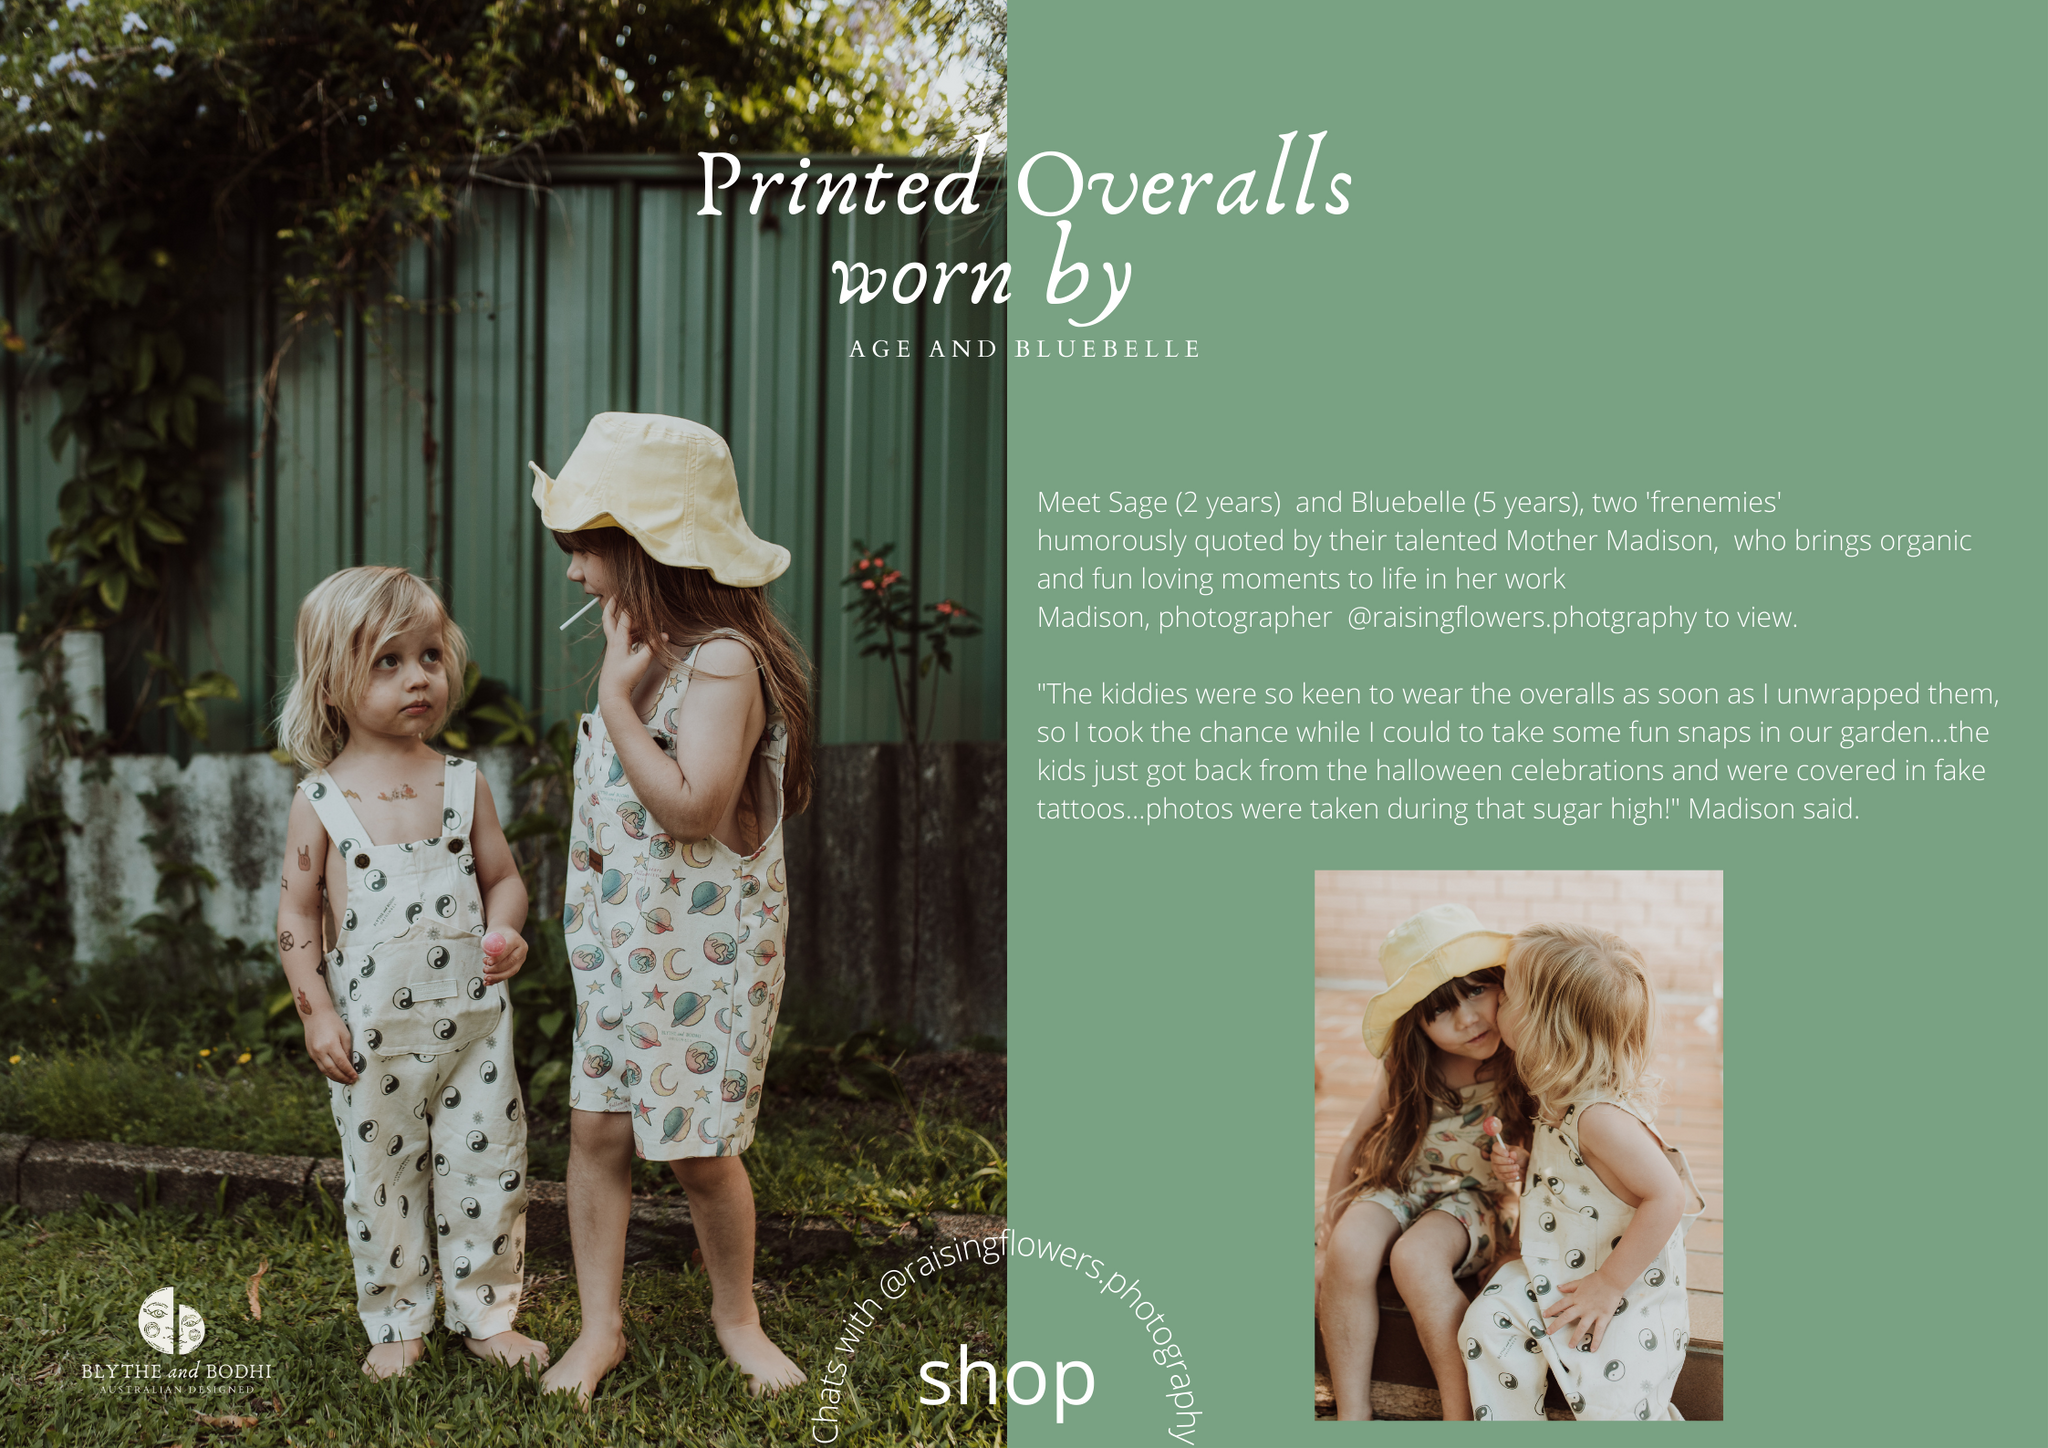 Printed Overalls worn by Sage and Bluebelle